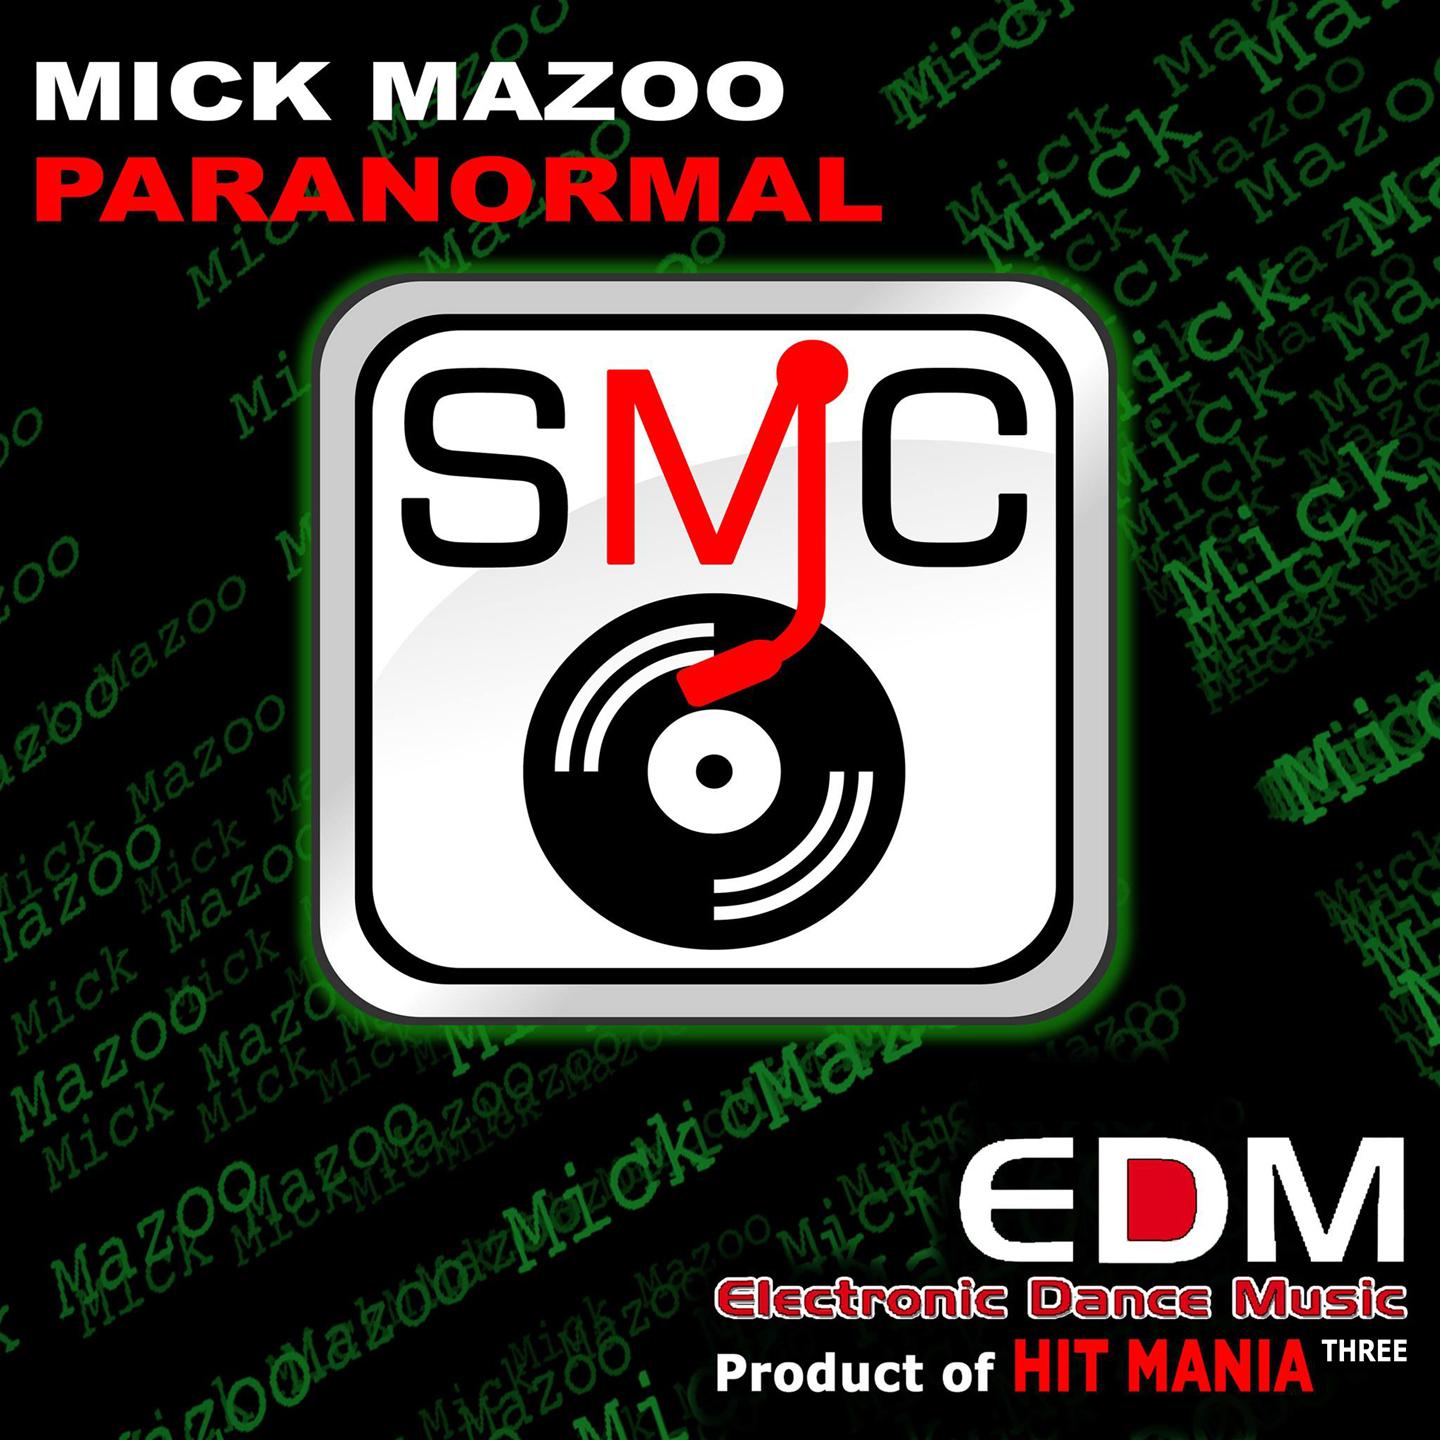 Paranormal (Electronic Dance Music Three, Product of Hit Mania)